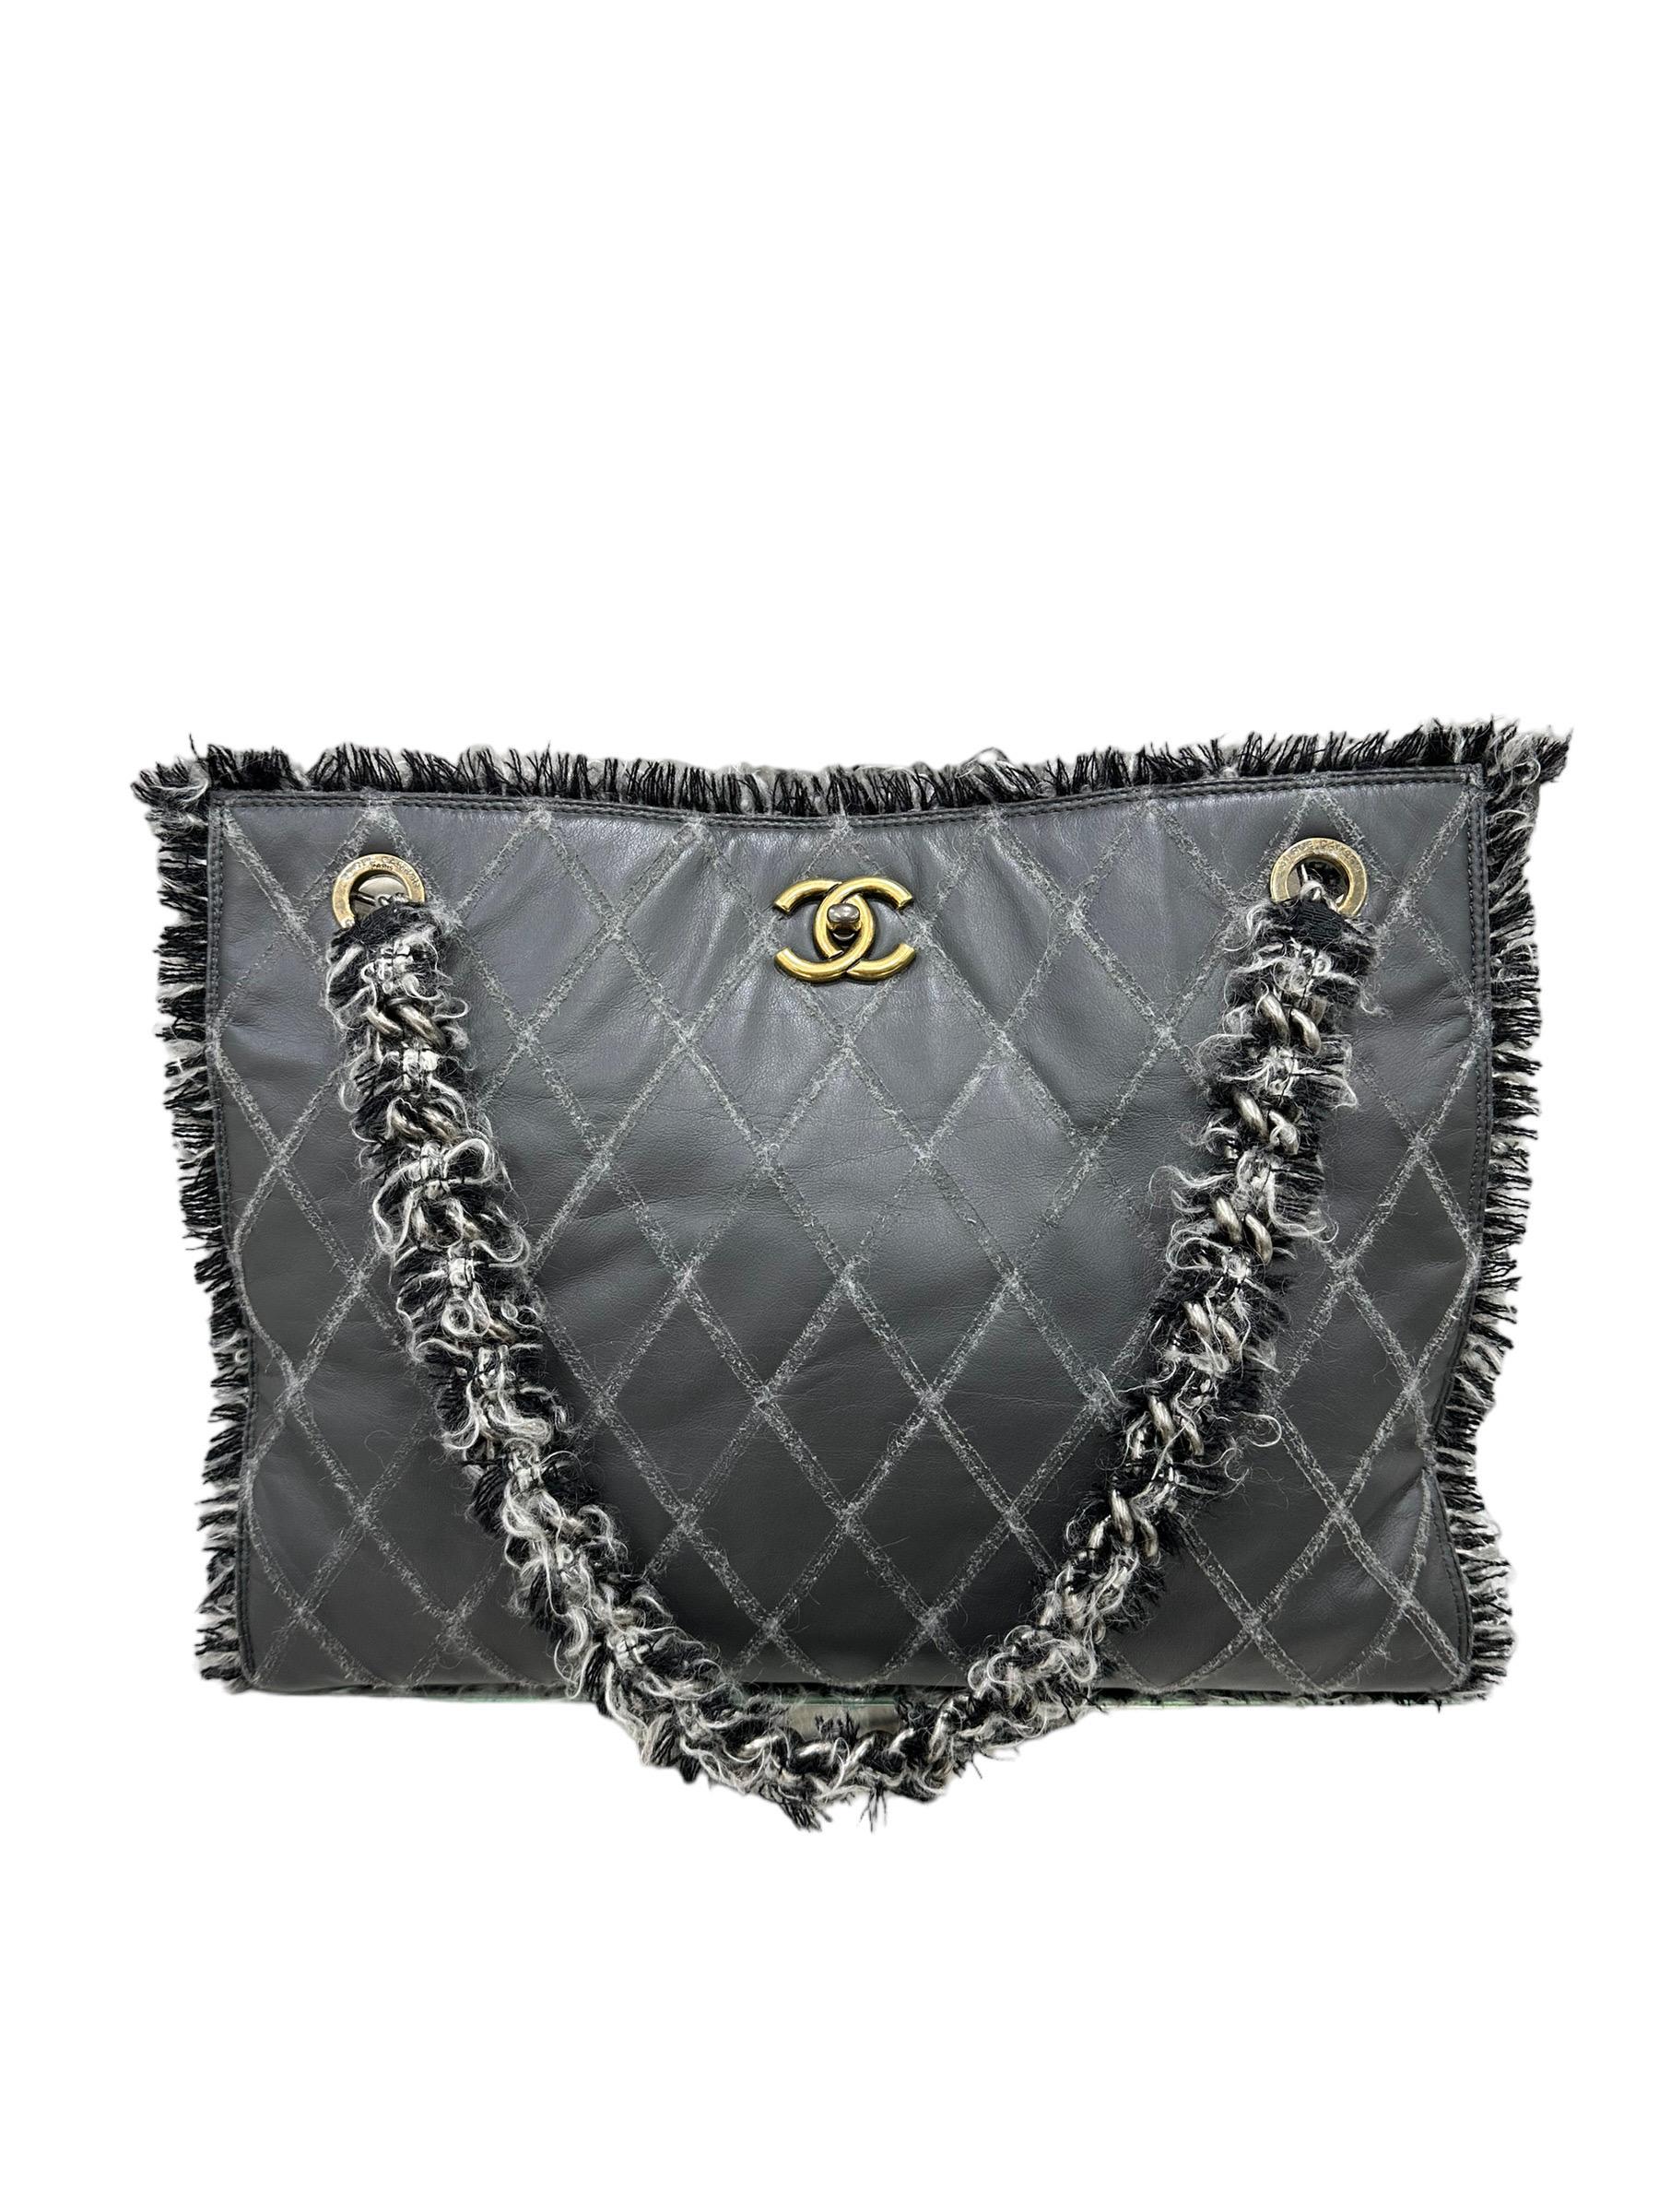 2011 Chanel Tweed Grey Tote Bag For Sale 7